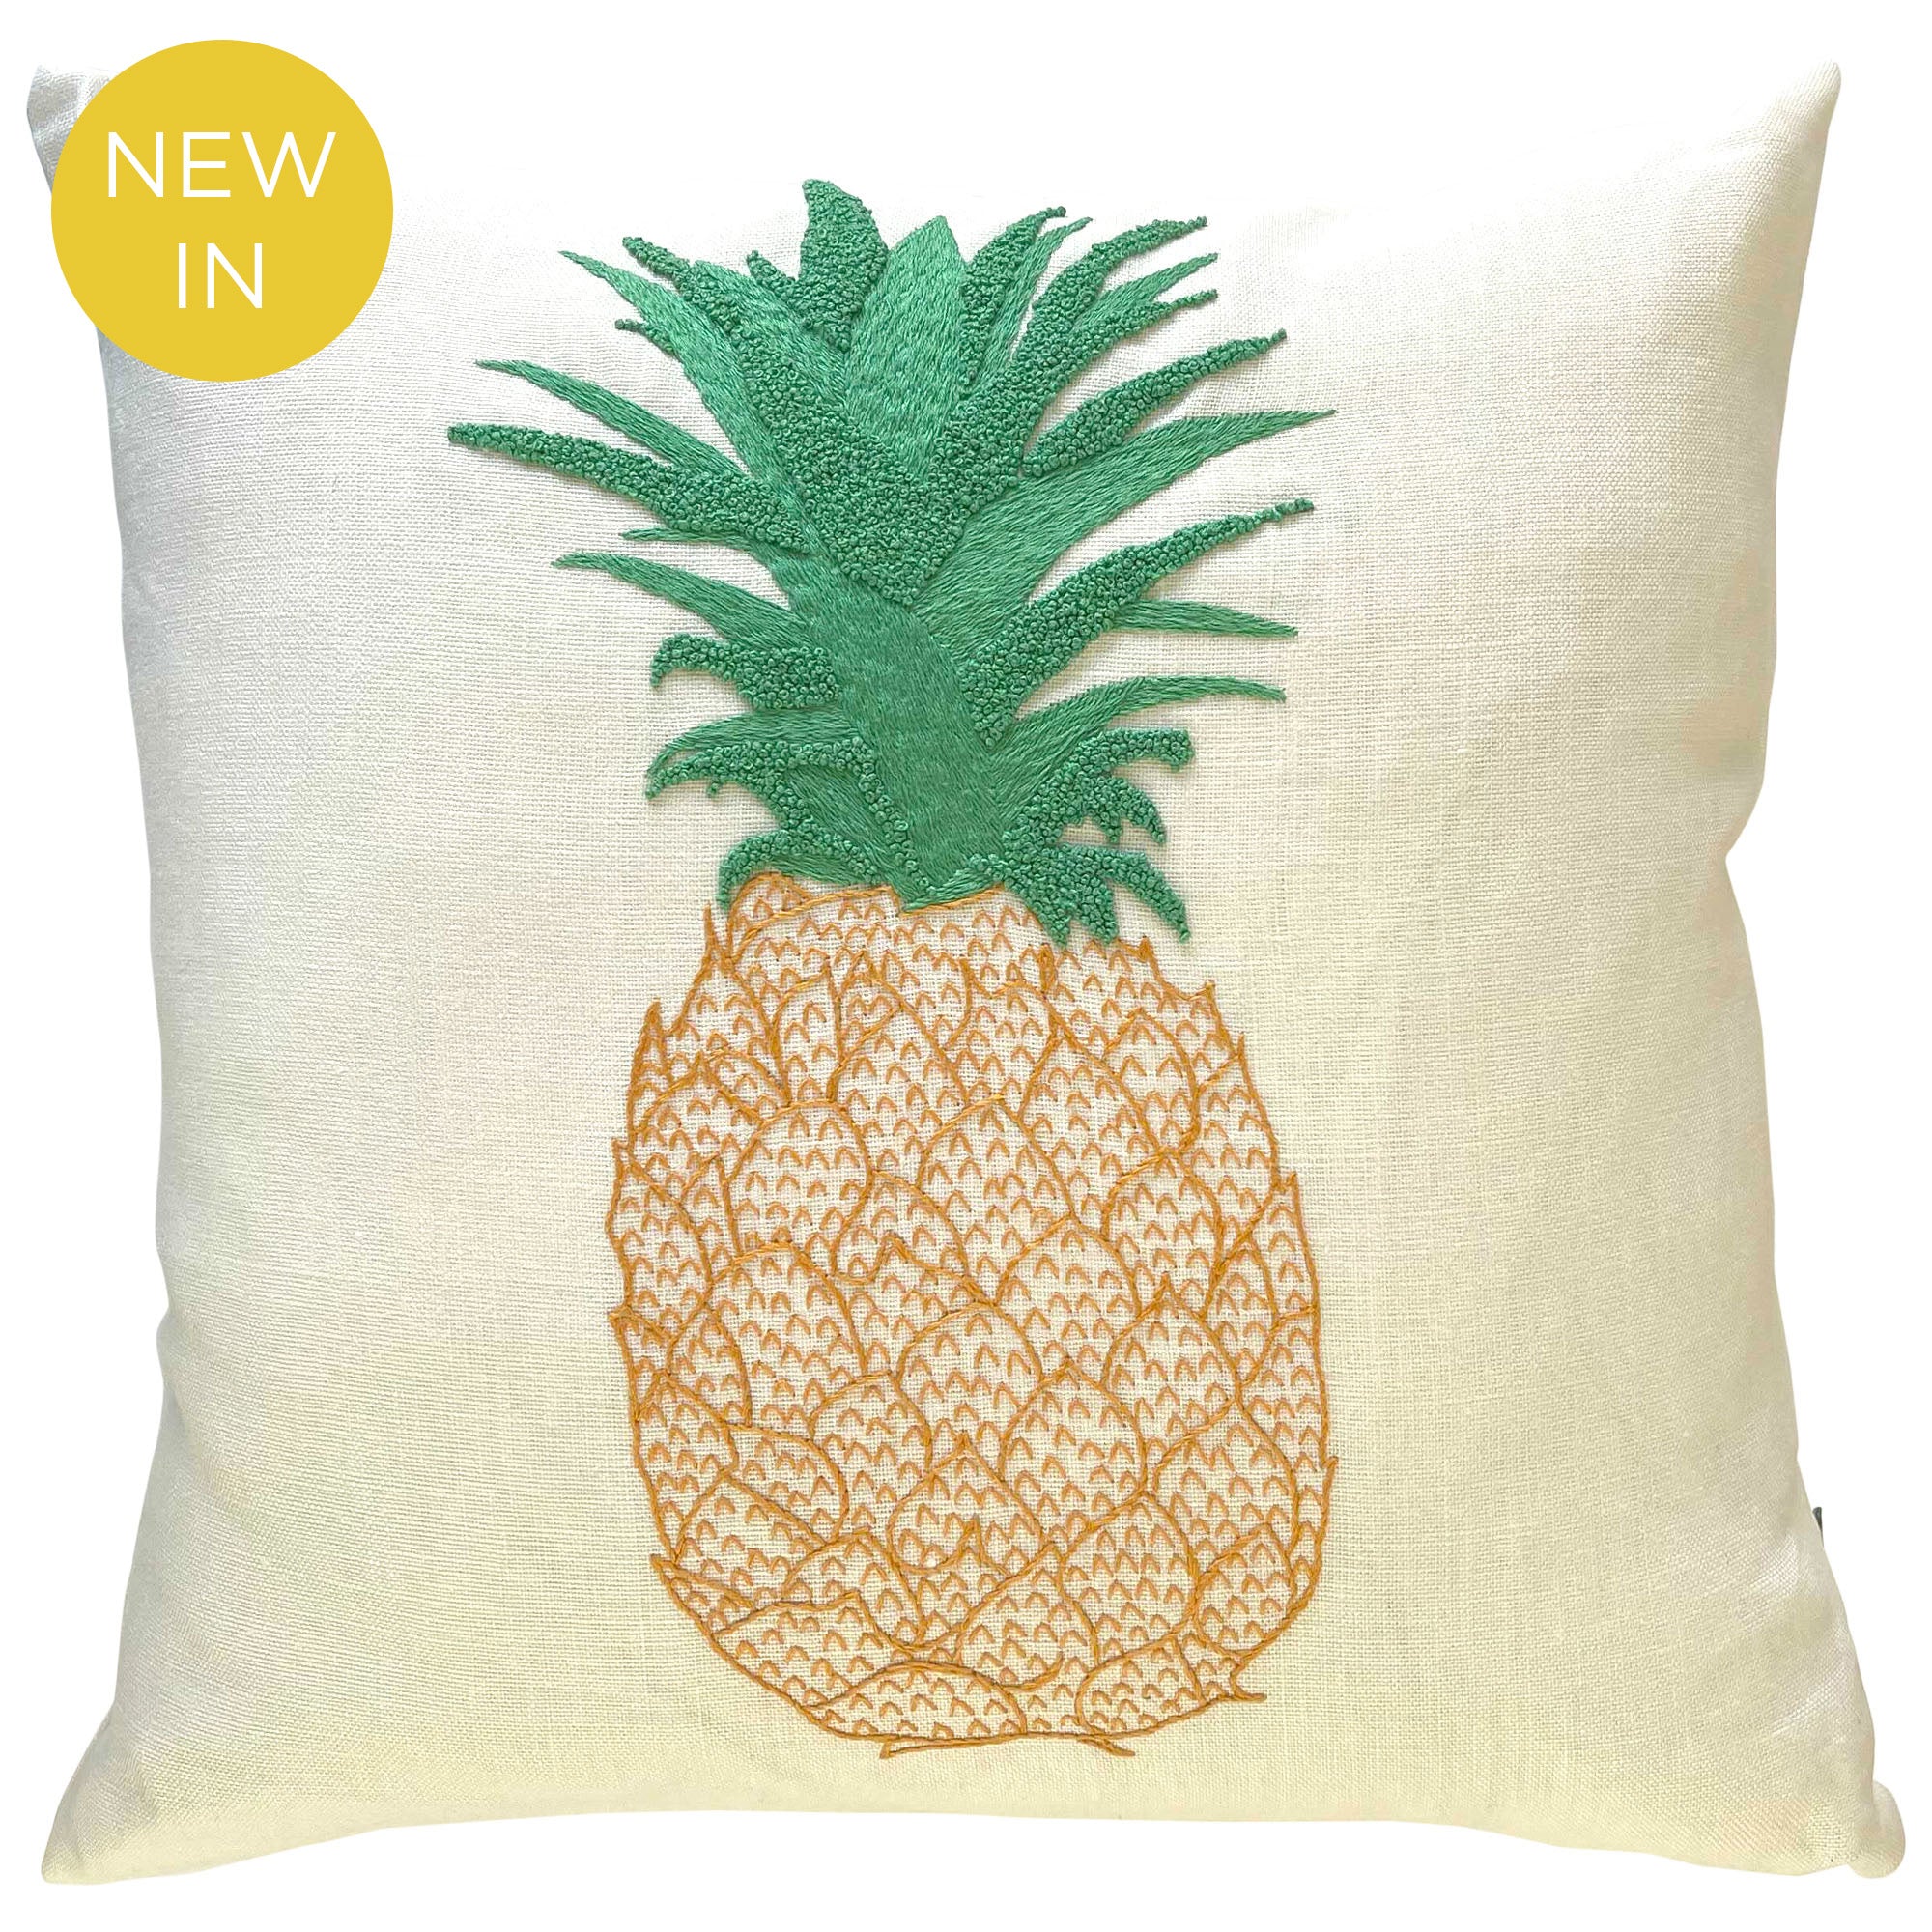 Fine-Cell-Work-Yellow-Green-Hand-Embroidered-Pineapple-Cushion-Melissa-Wyndham-New-In.jpg